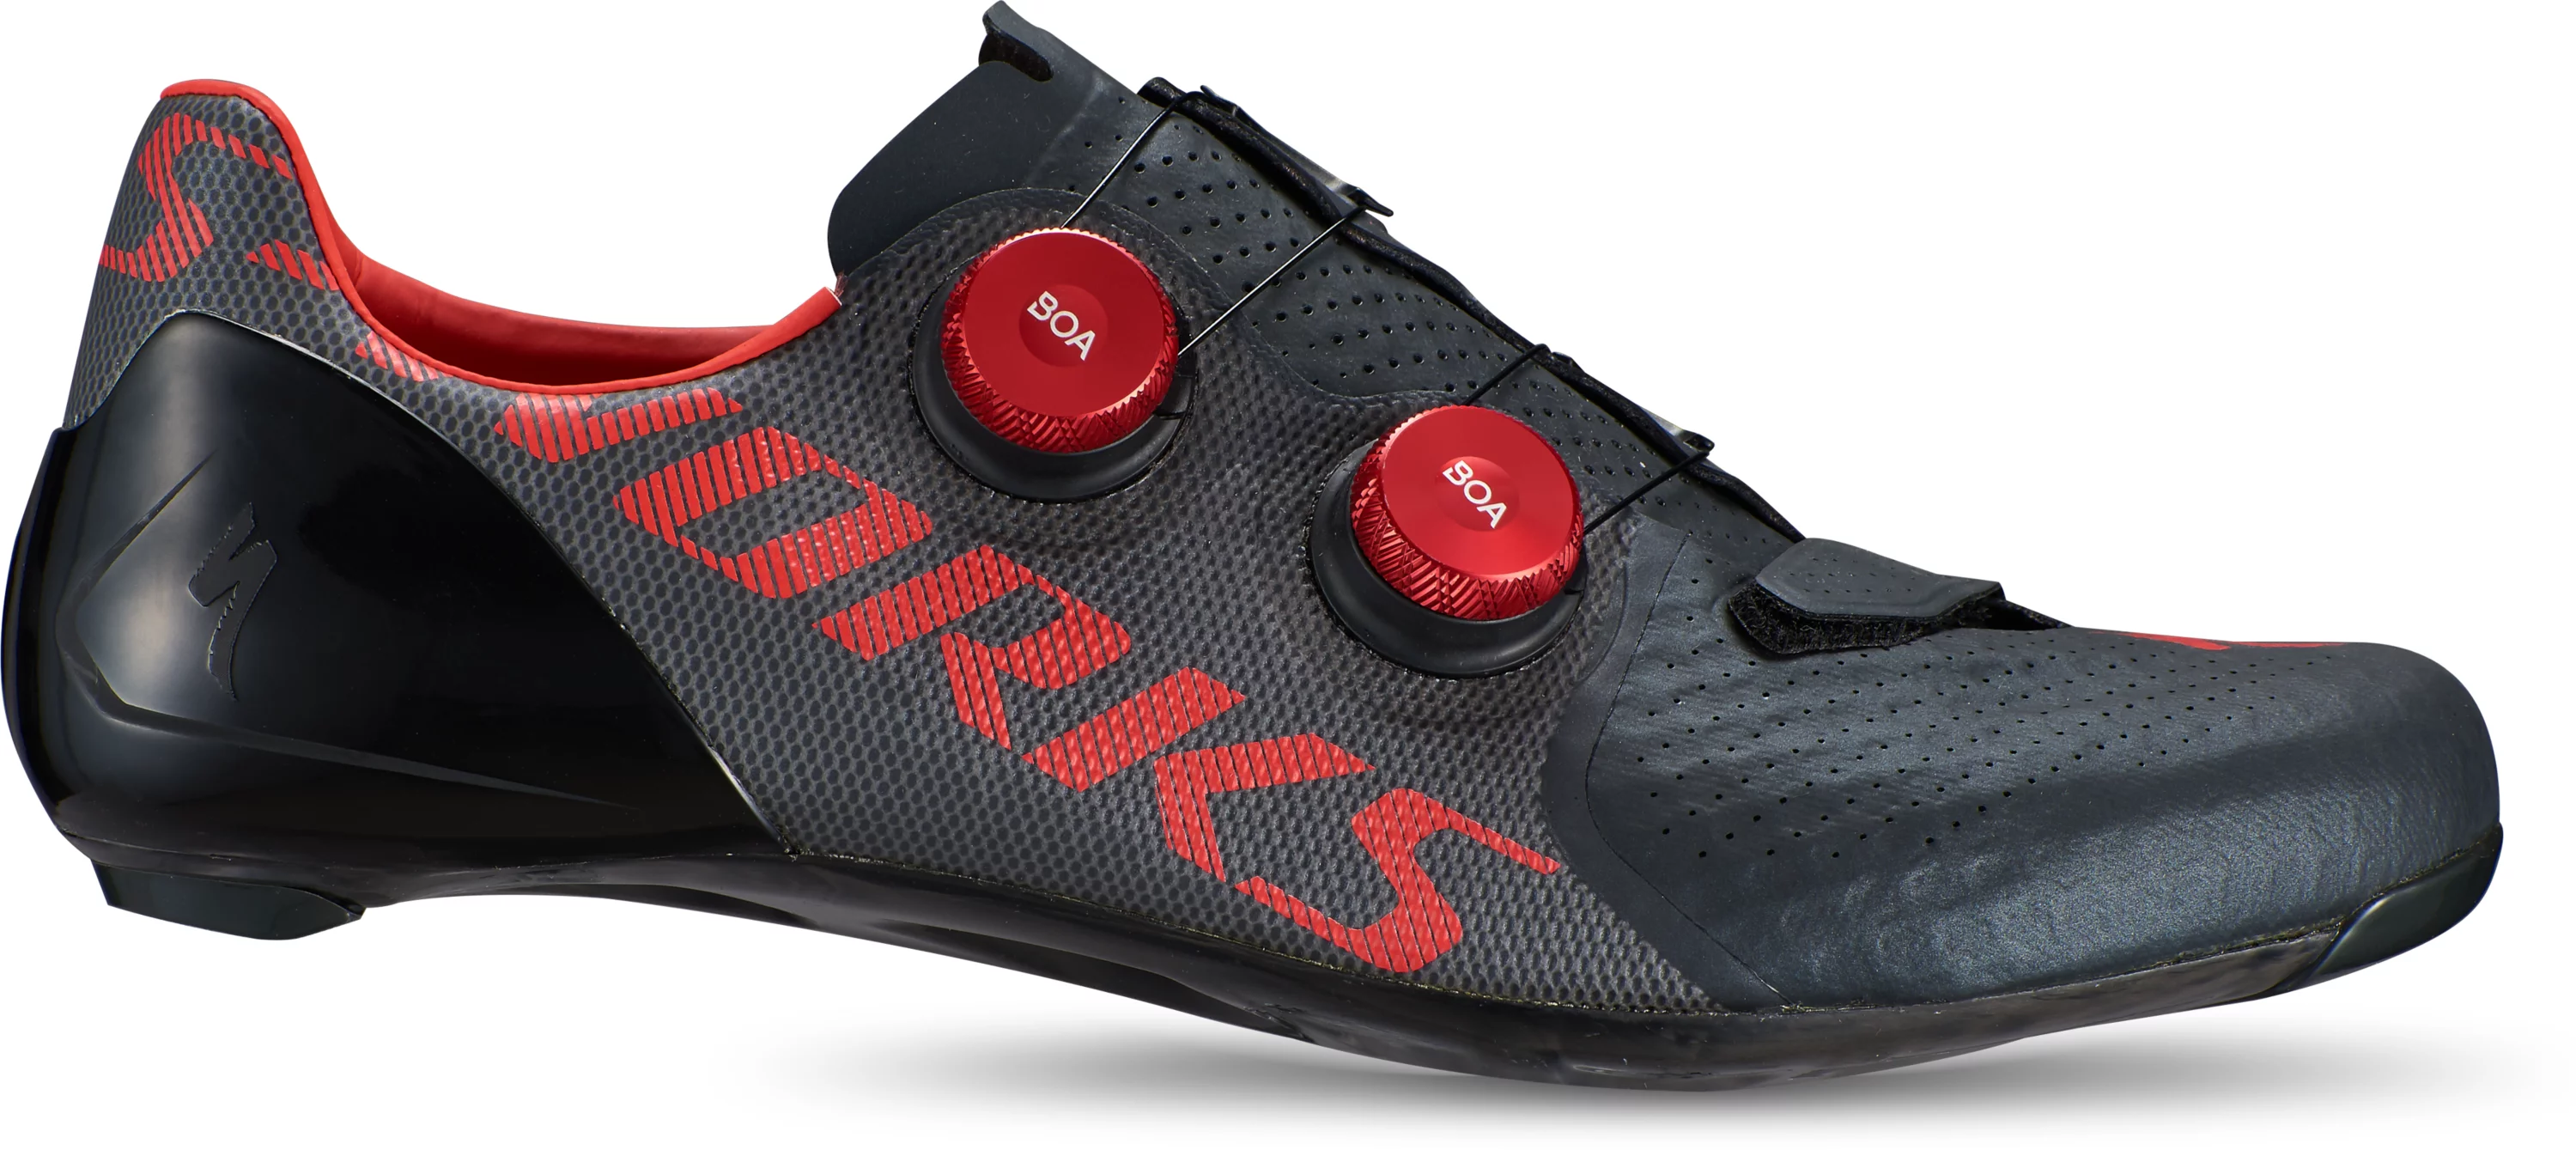 S-Works_7_Road_Shoes